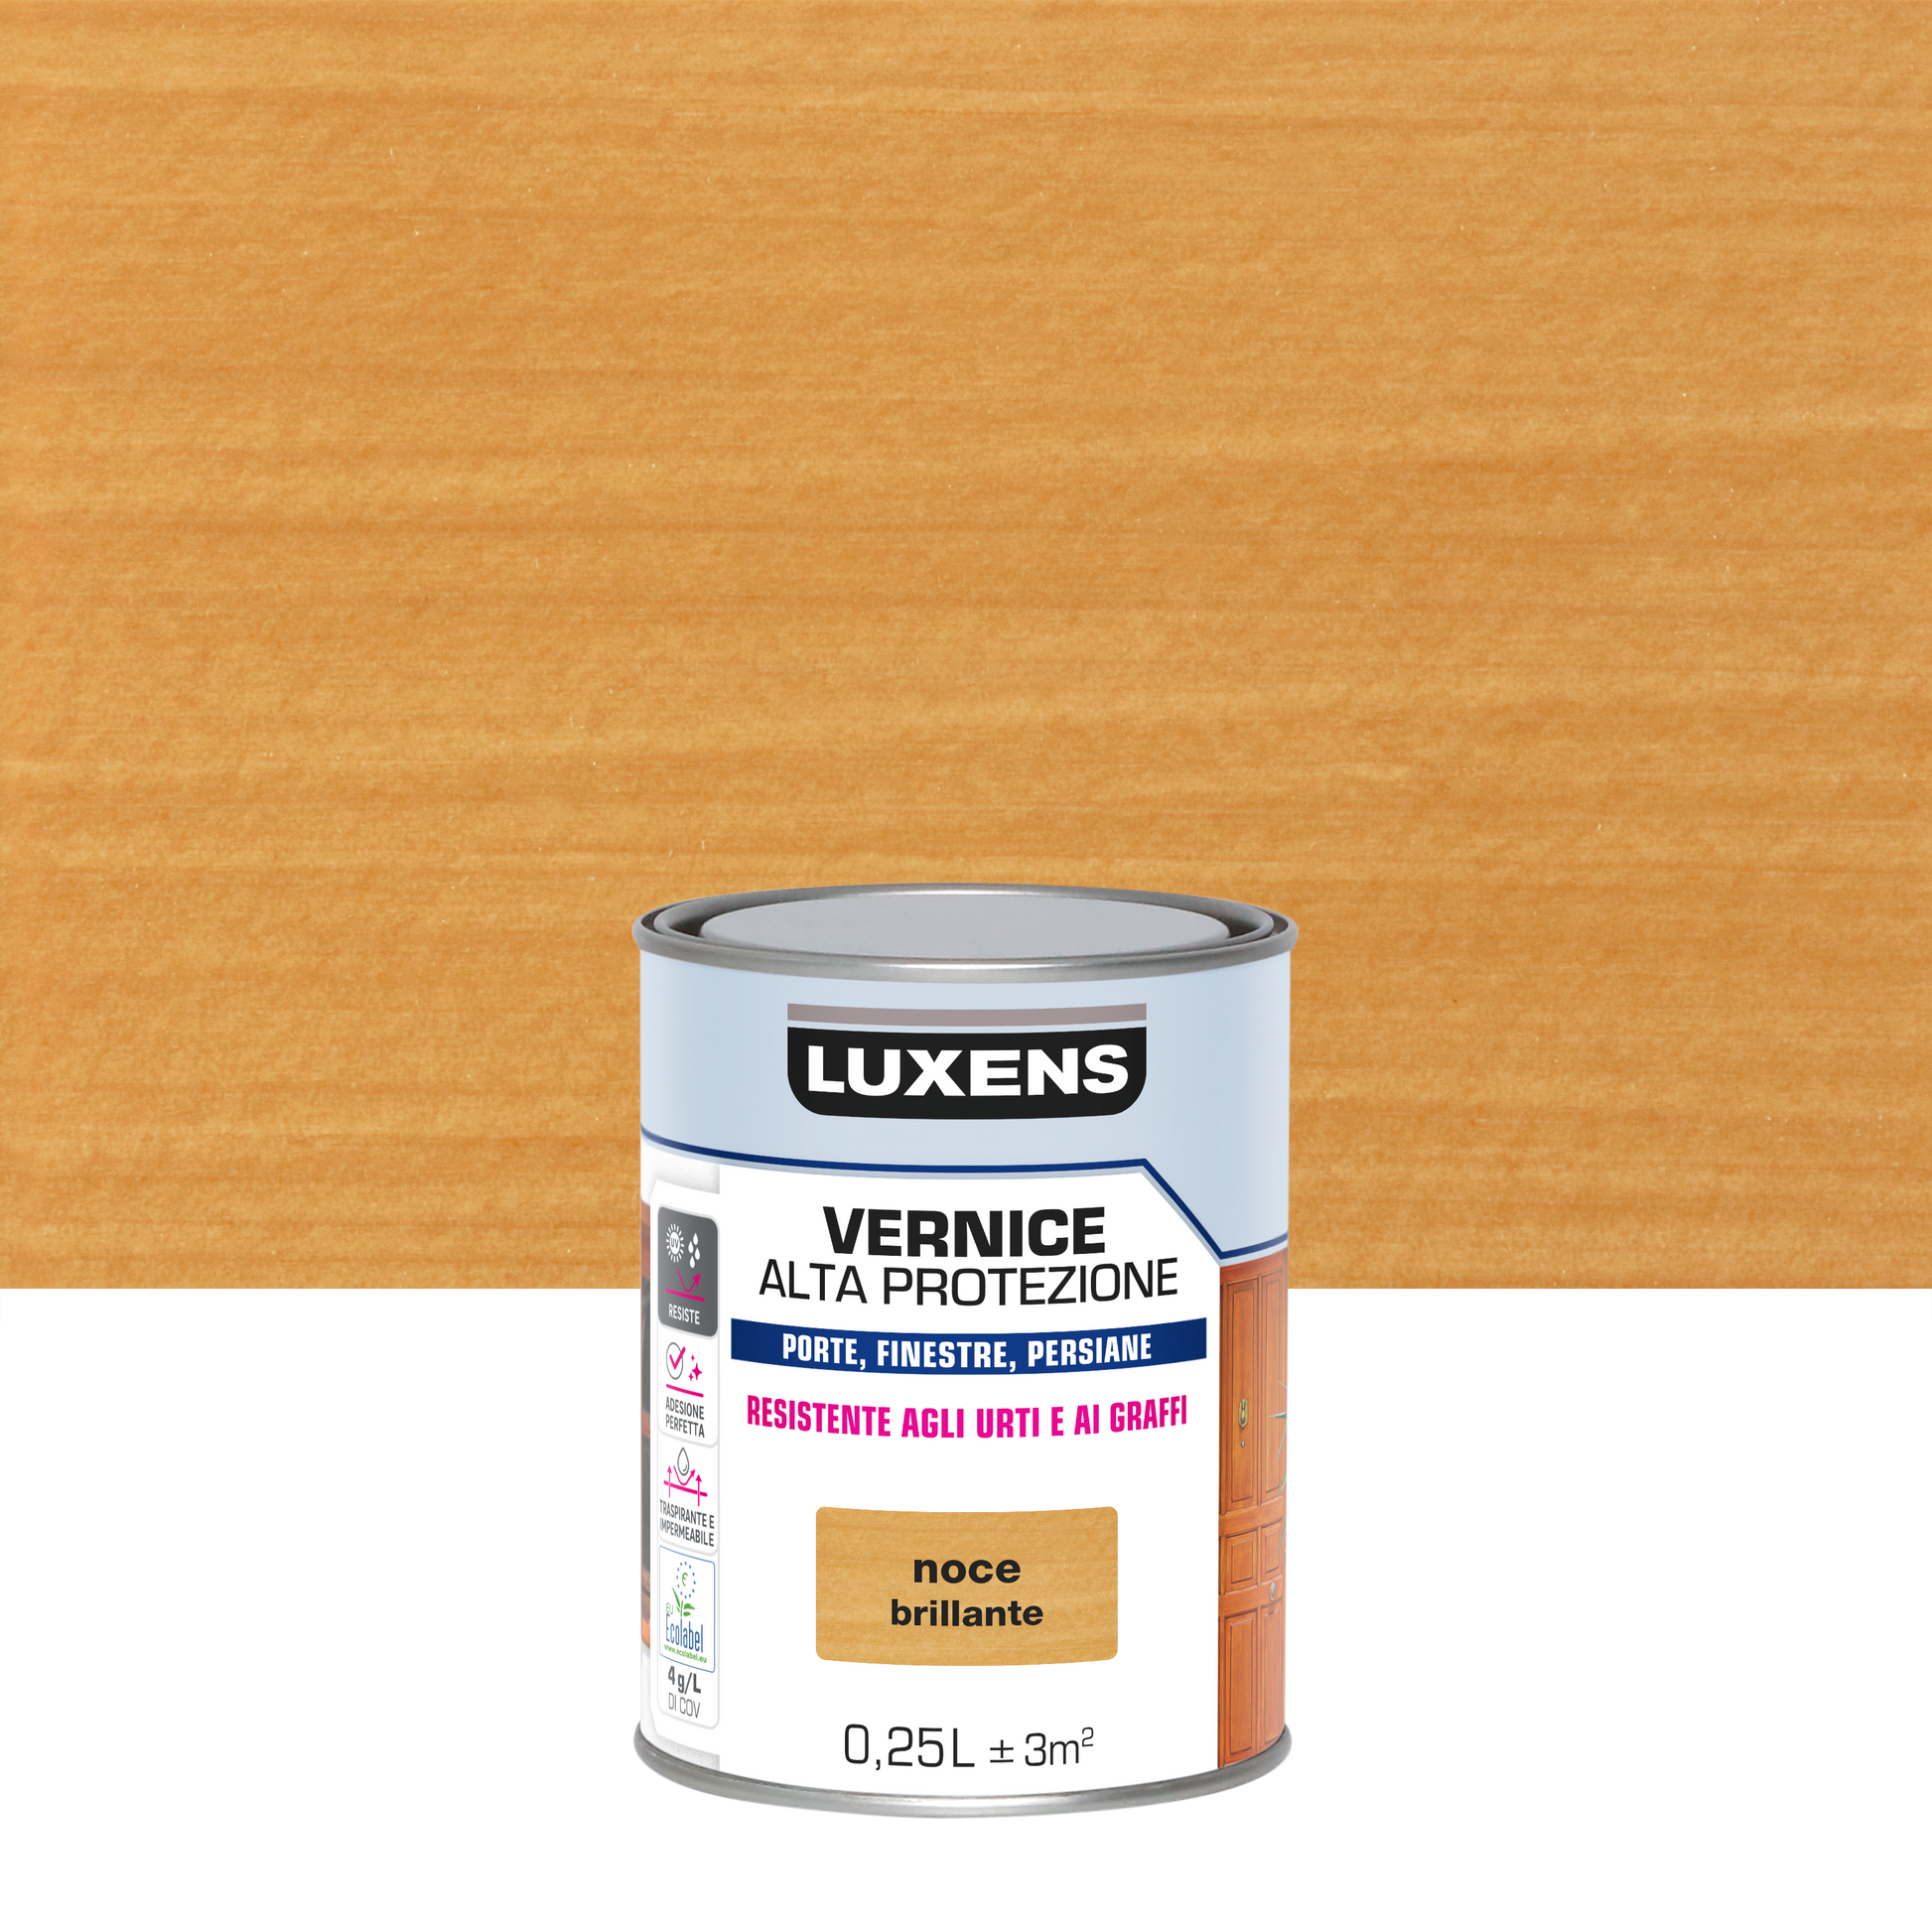 LUXENS HIGH-PROTECTION WALNUT HIGH-GLOSS WATER-BASED WOOD VARNISH 250 ML